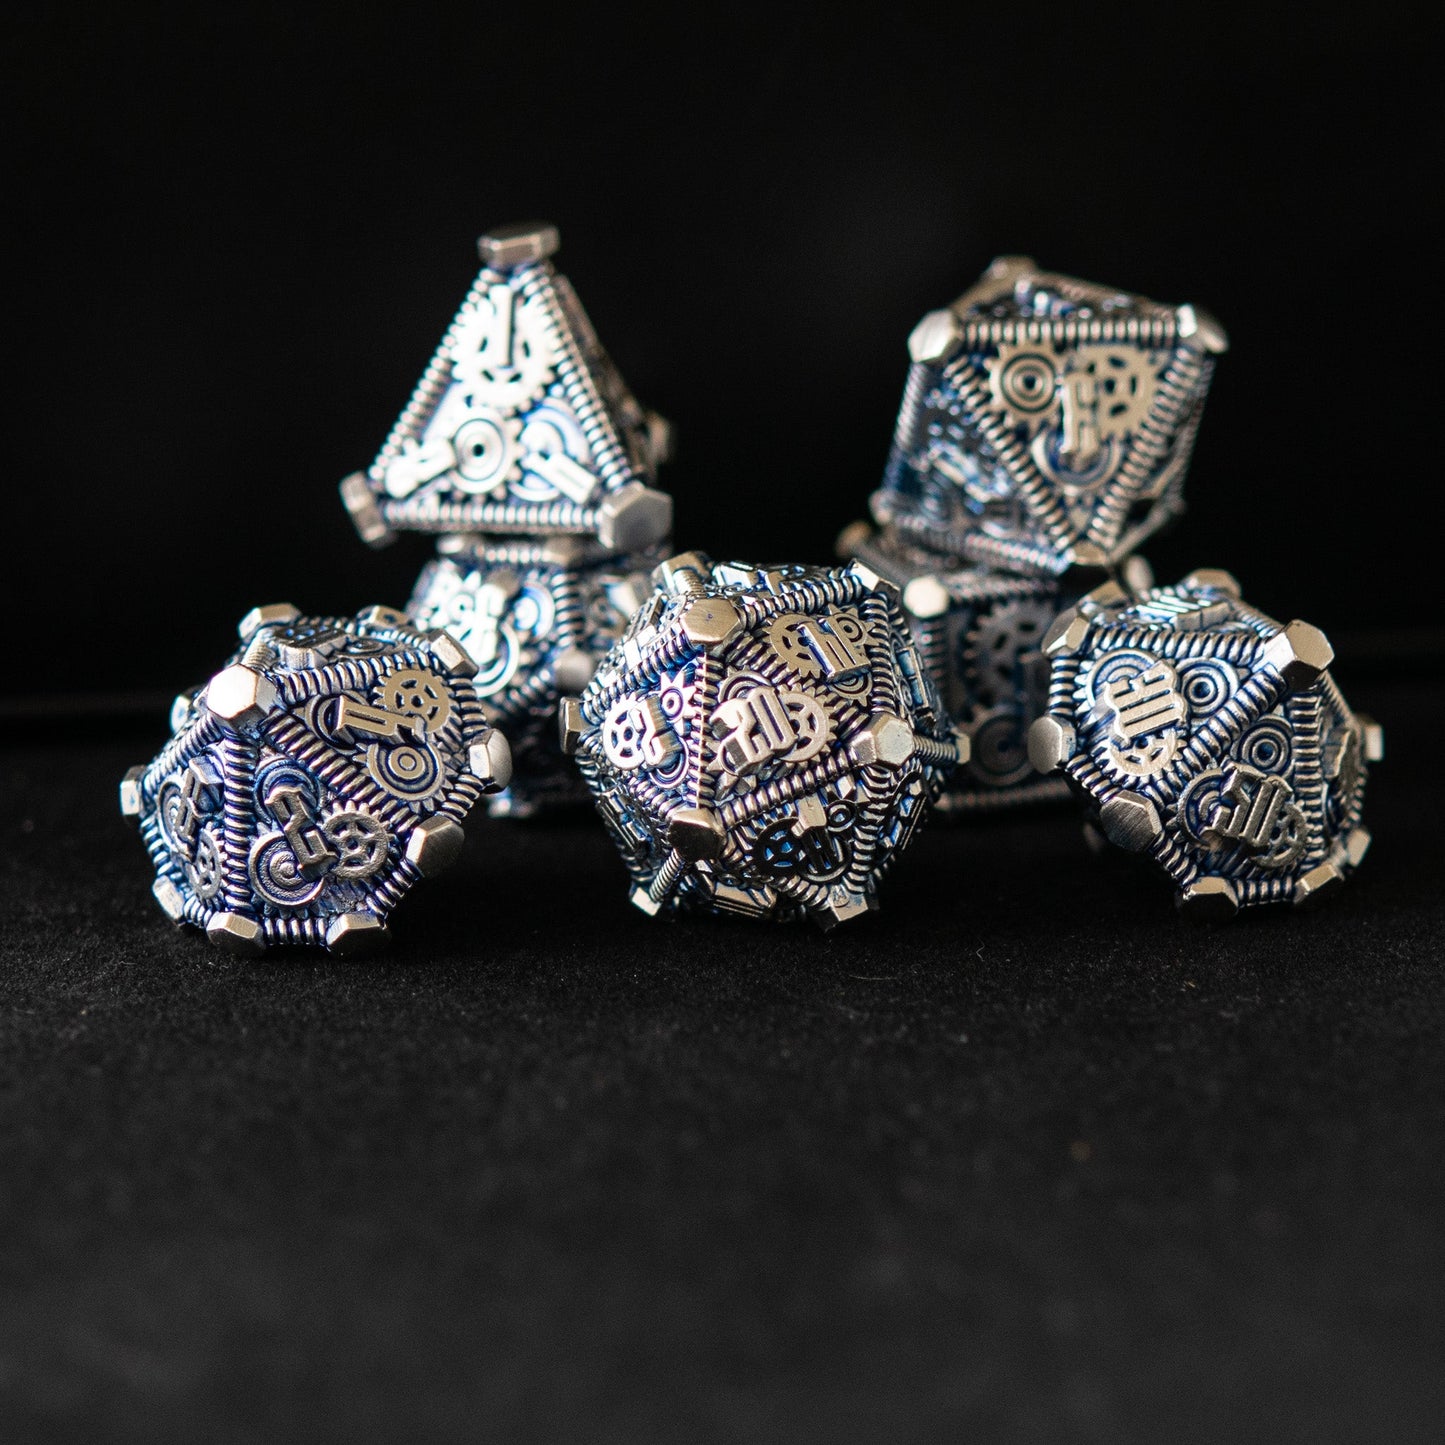 Blue and Silver - Weird West Wasteland Metal Dice Set